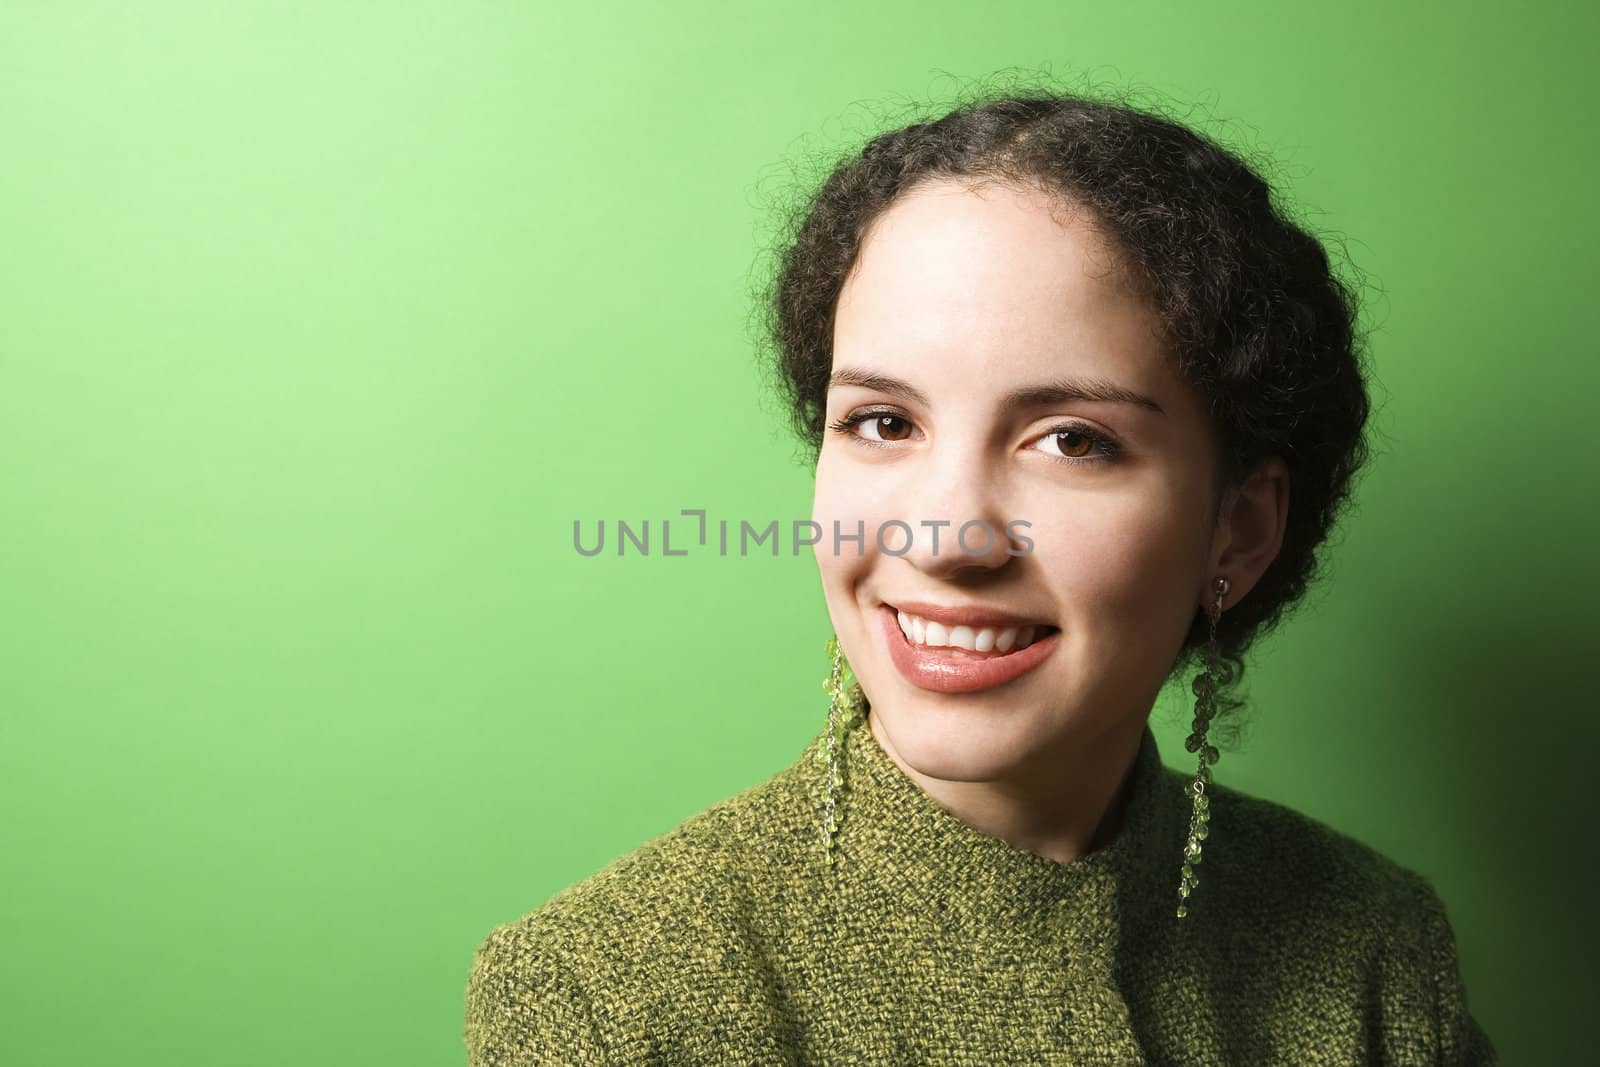 Smiling young Caucasian woman on green background wearing green clothing.